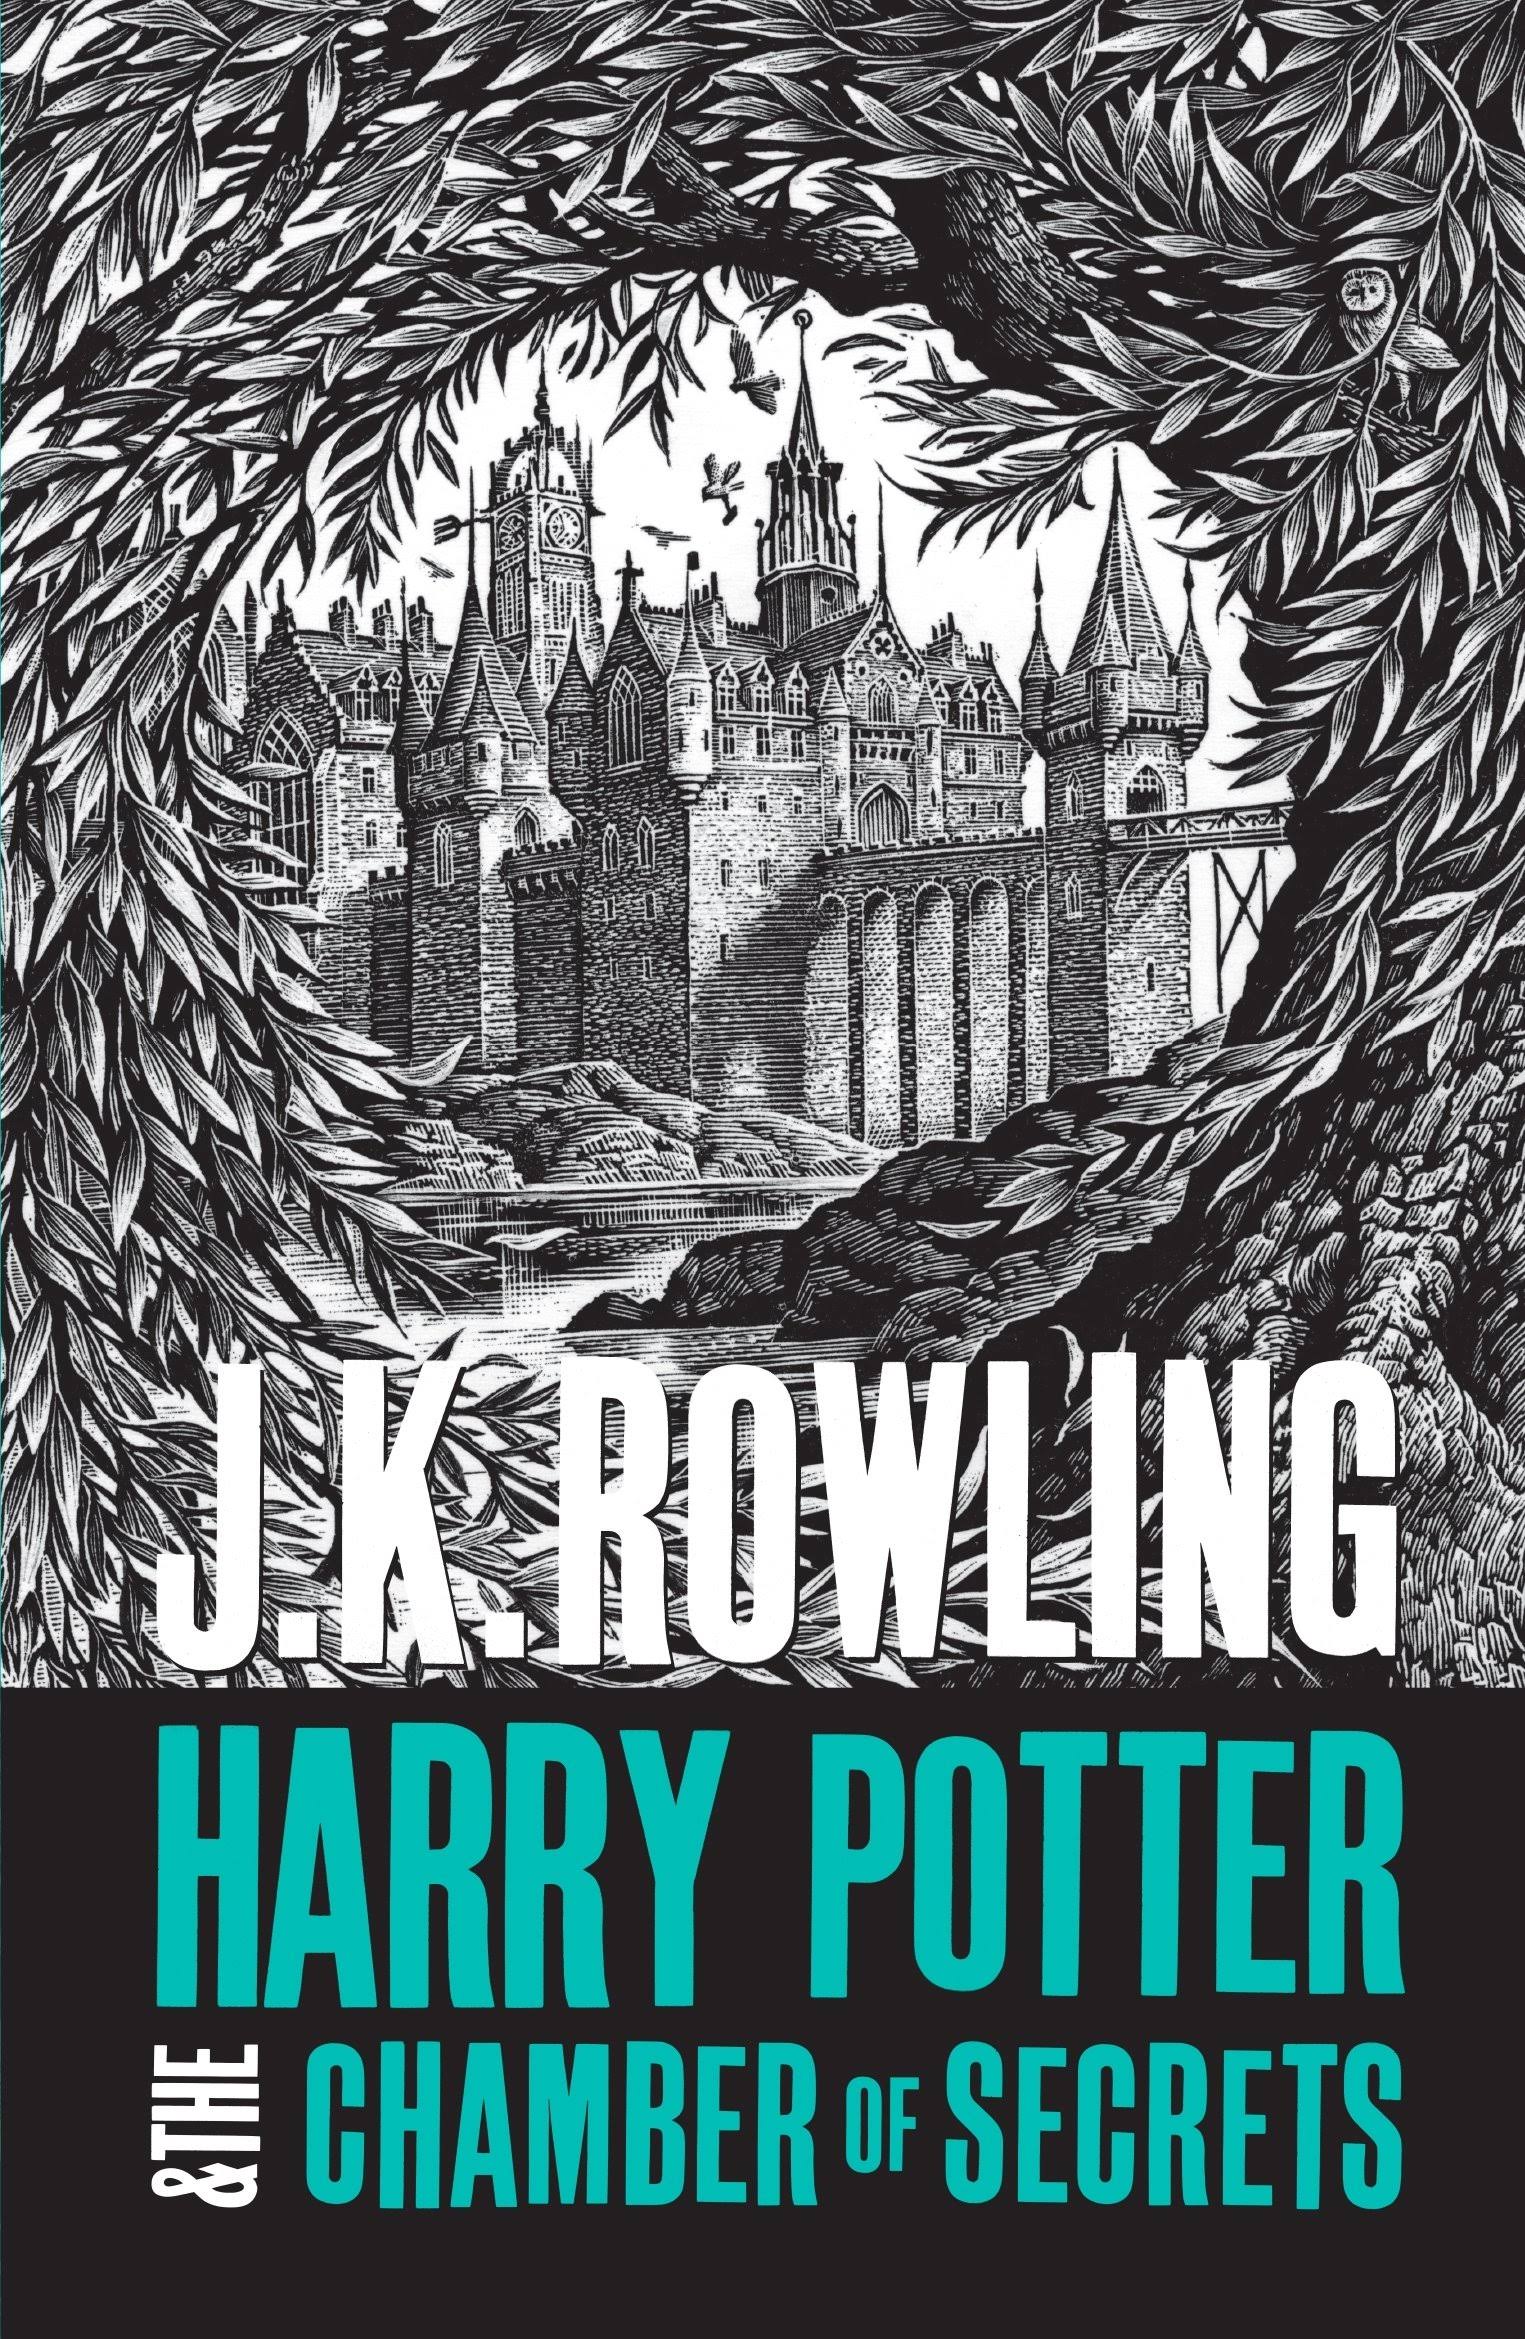 Harry Potter and the Chamber of Secrets [Book]